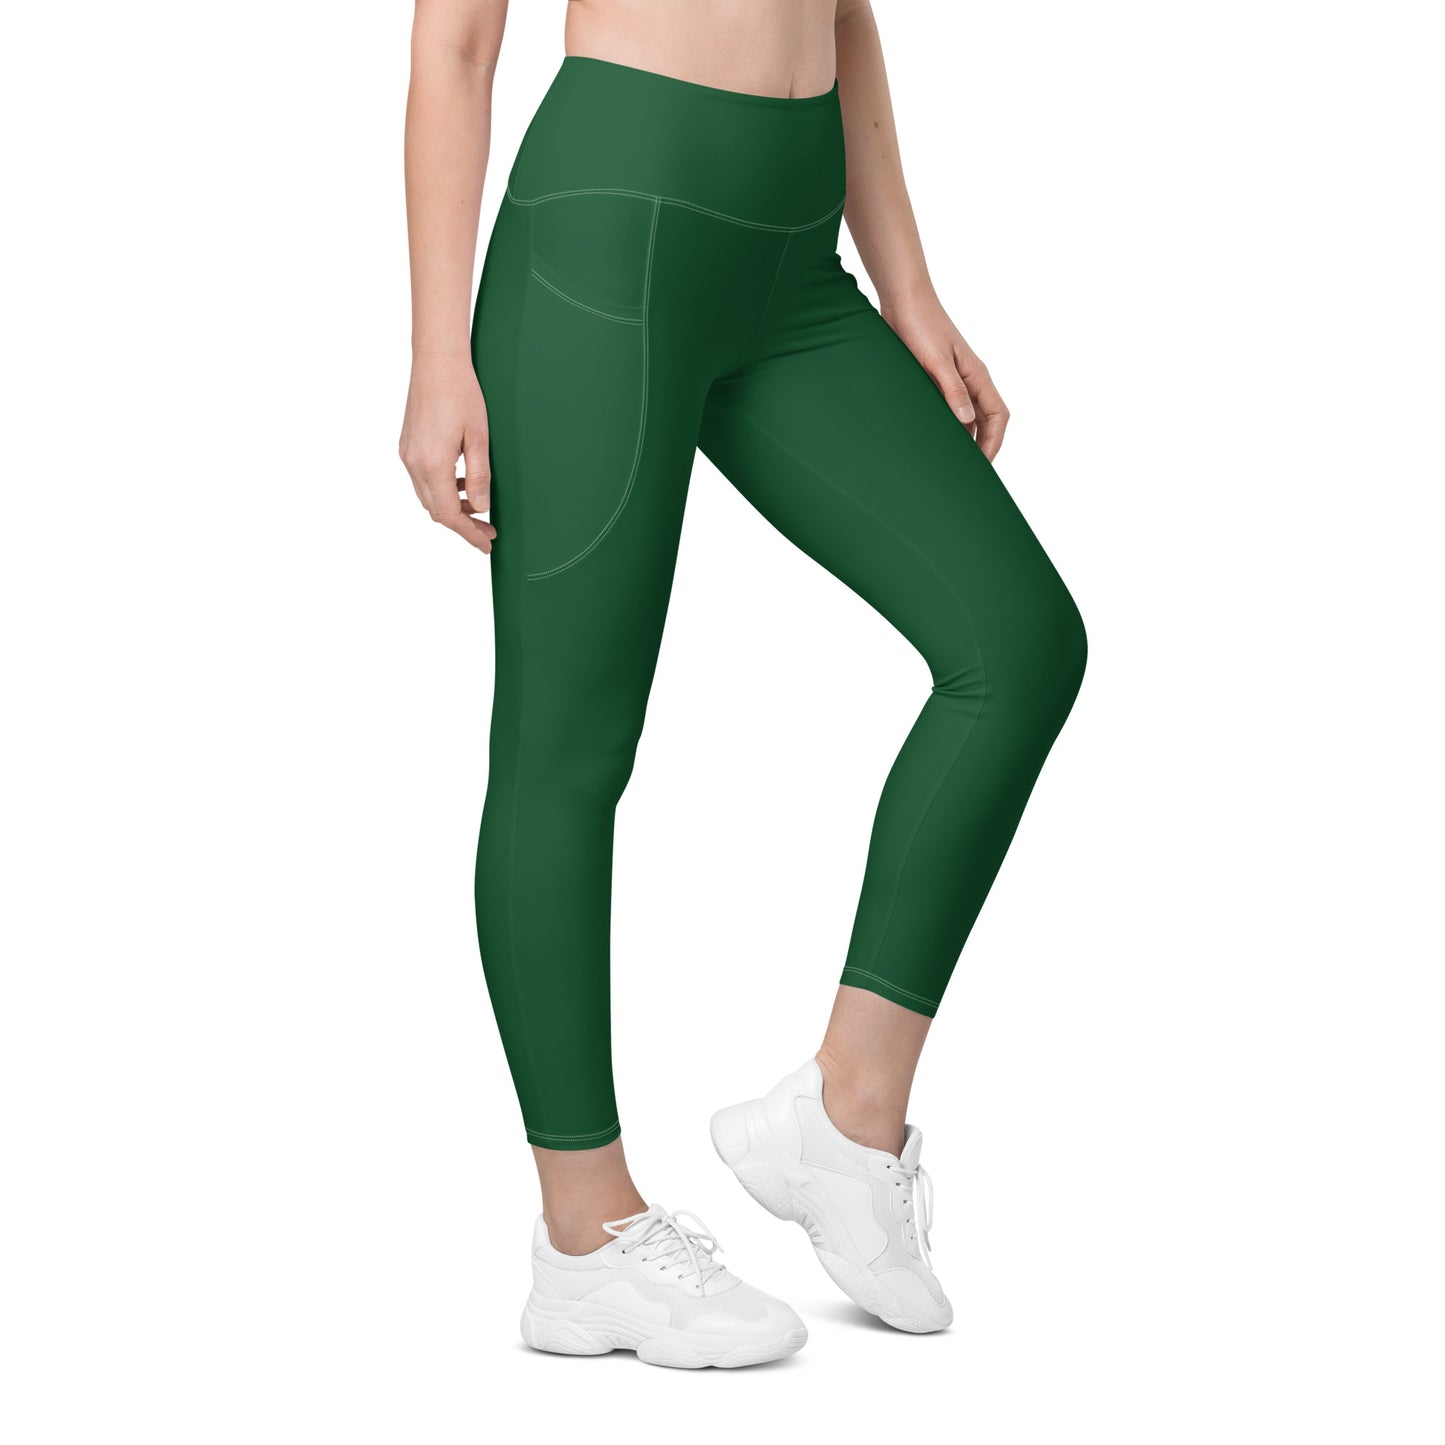 Edelweiss Solid Green High Waist 7/8 Recycled Yoga Leggings / Yoga Pants with Pockets